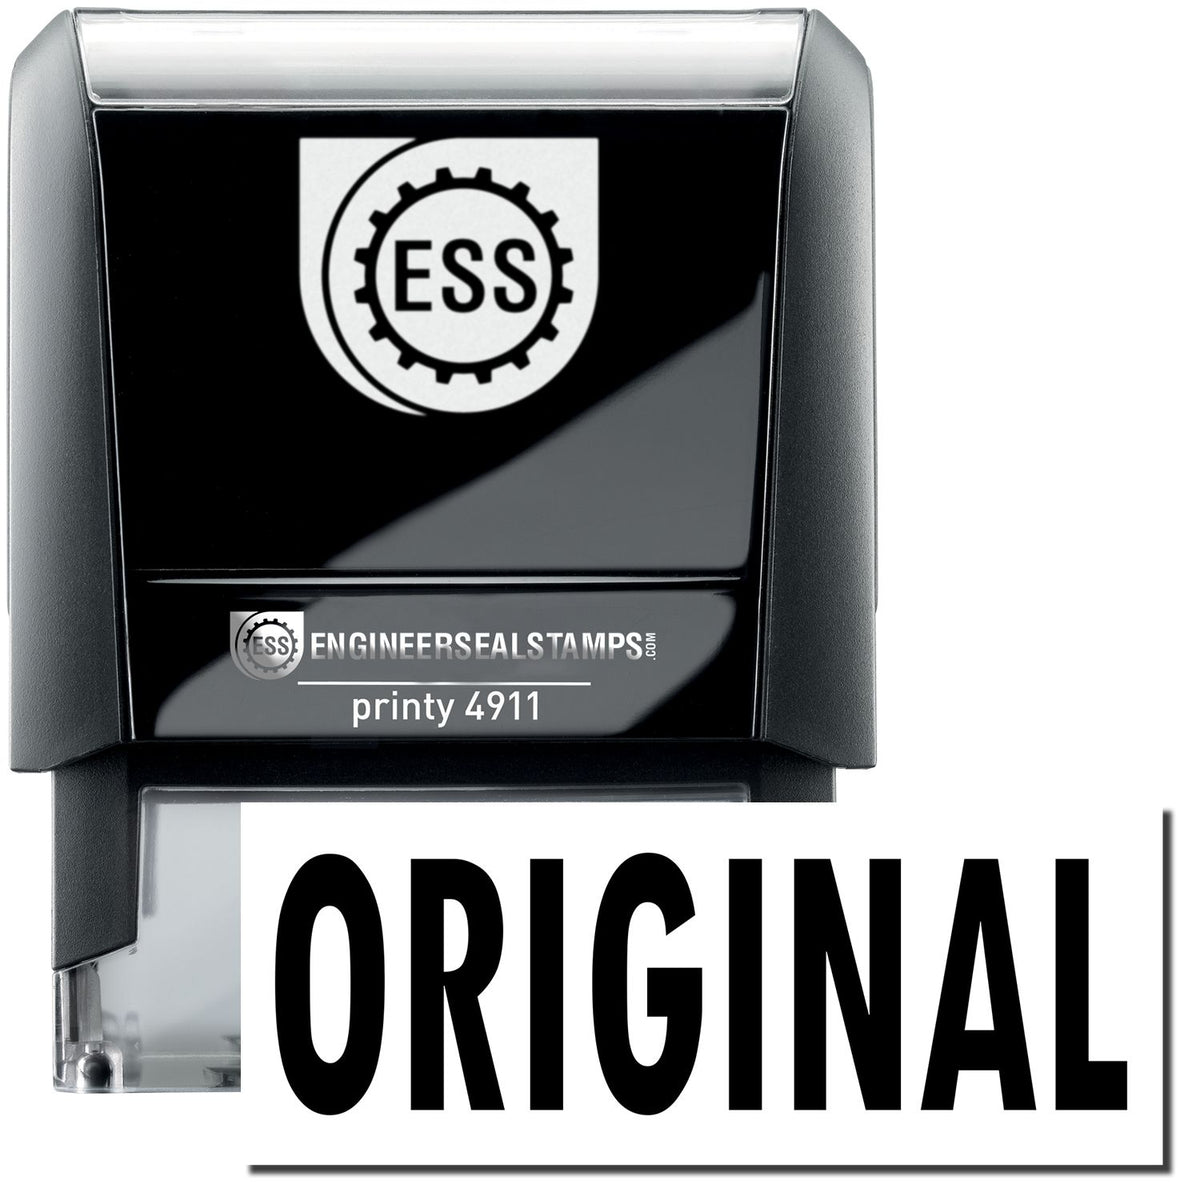 A self-inking stamp with a stamped image showing how the text &quot;ORIGINAL&quot; is displayed after stamping.